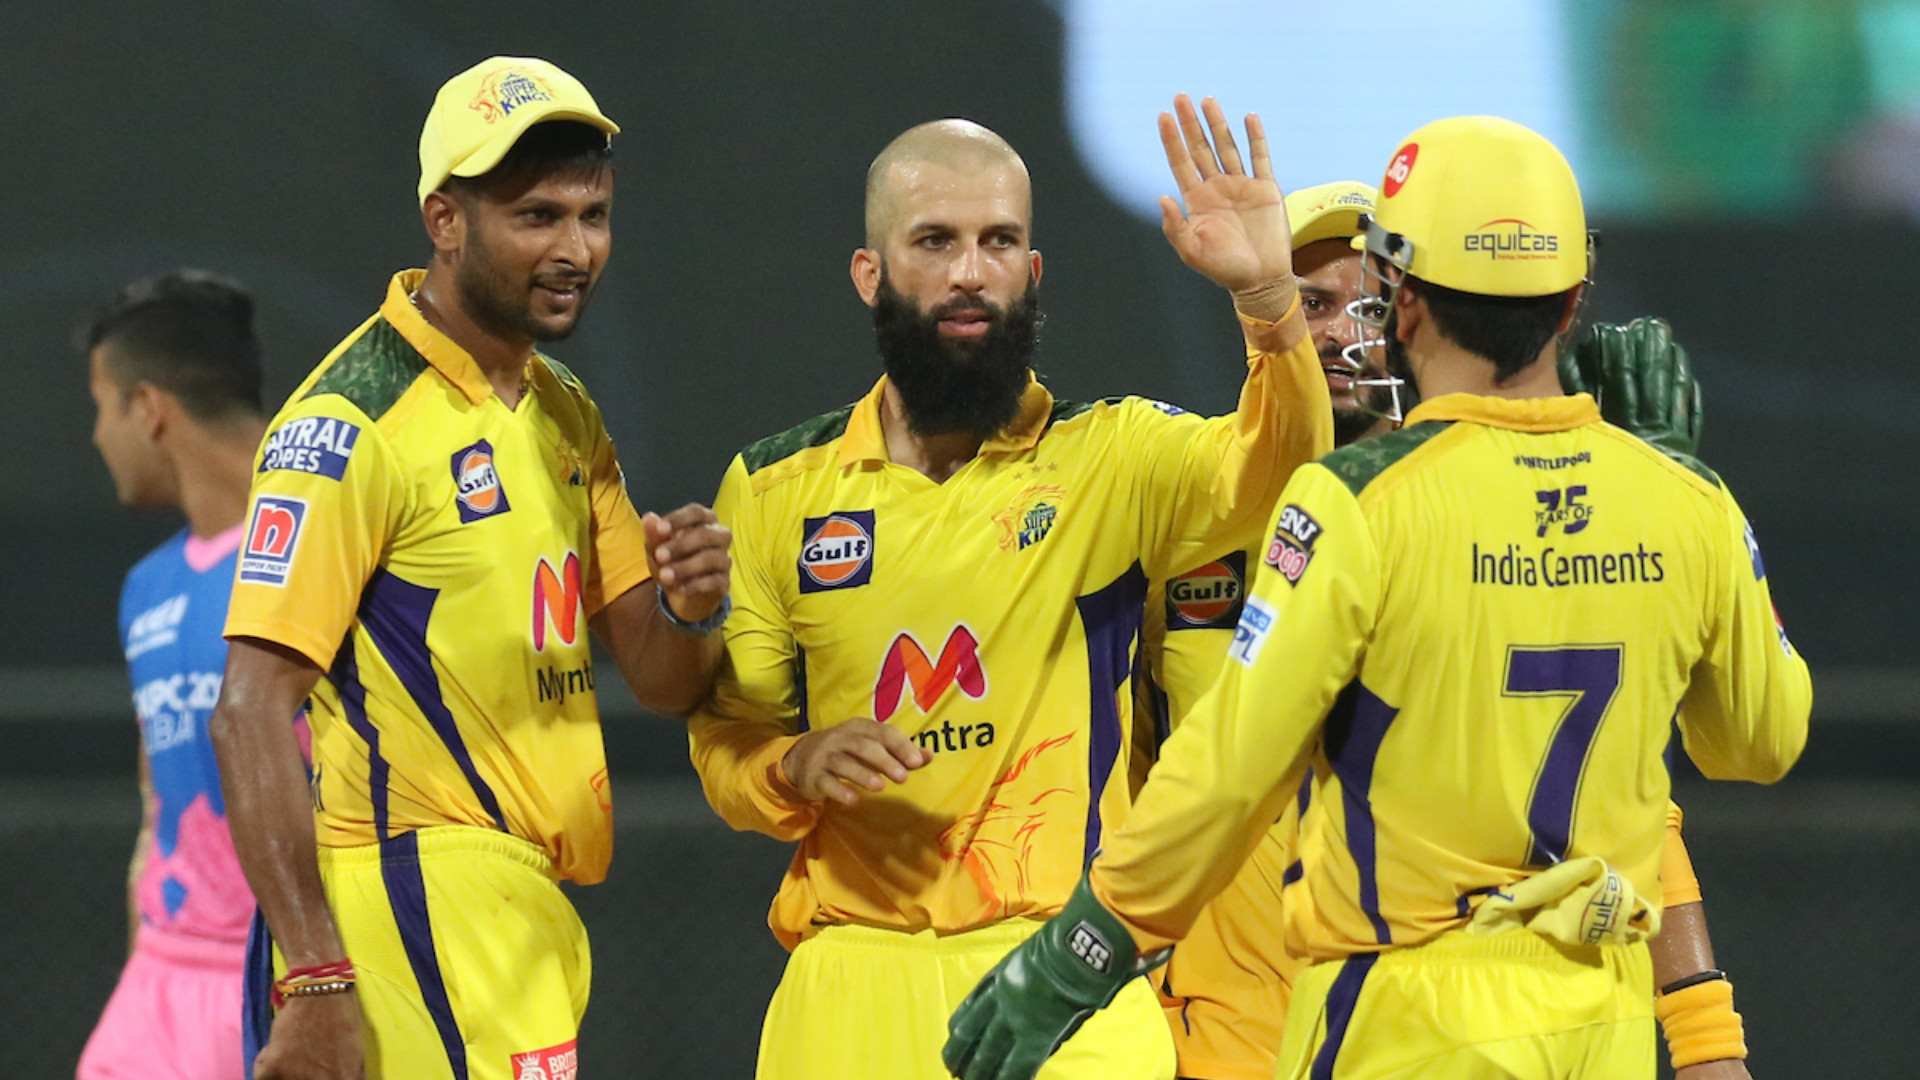 IPL 2021: Chennai Super Kings players in a file photo. (Image credit: Twitter/IPL)